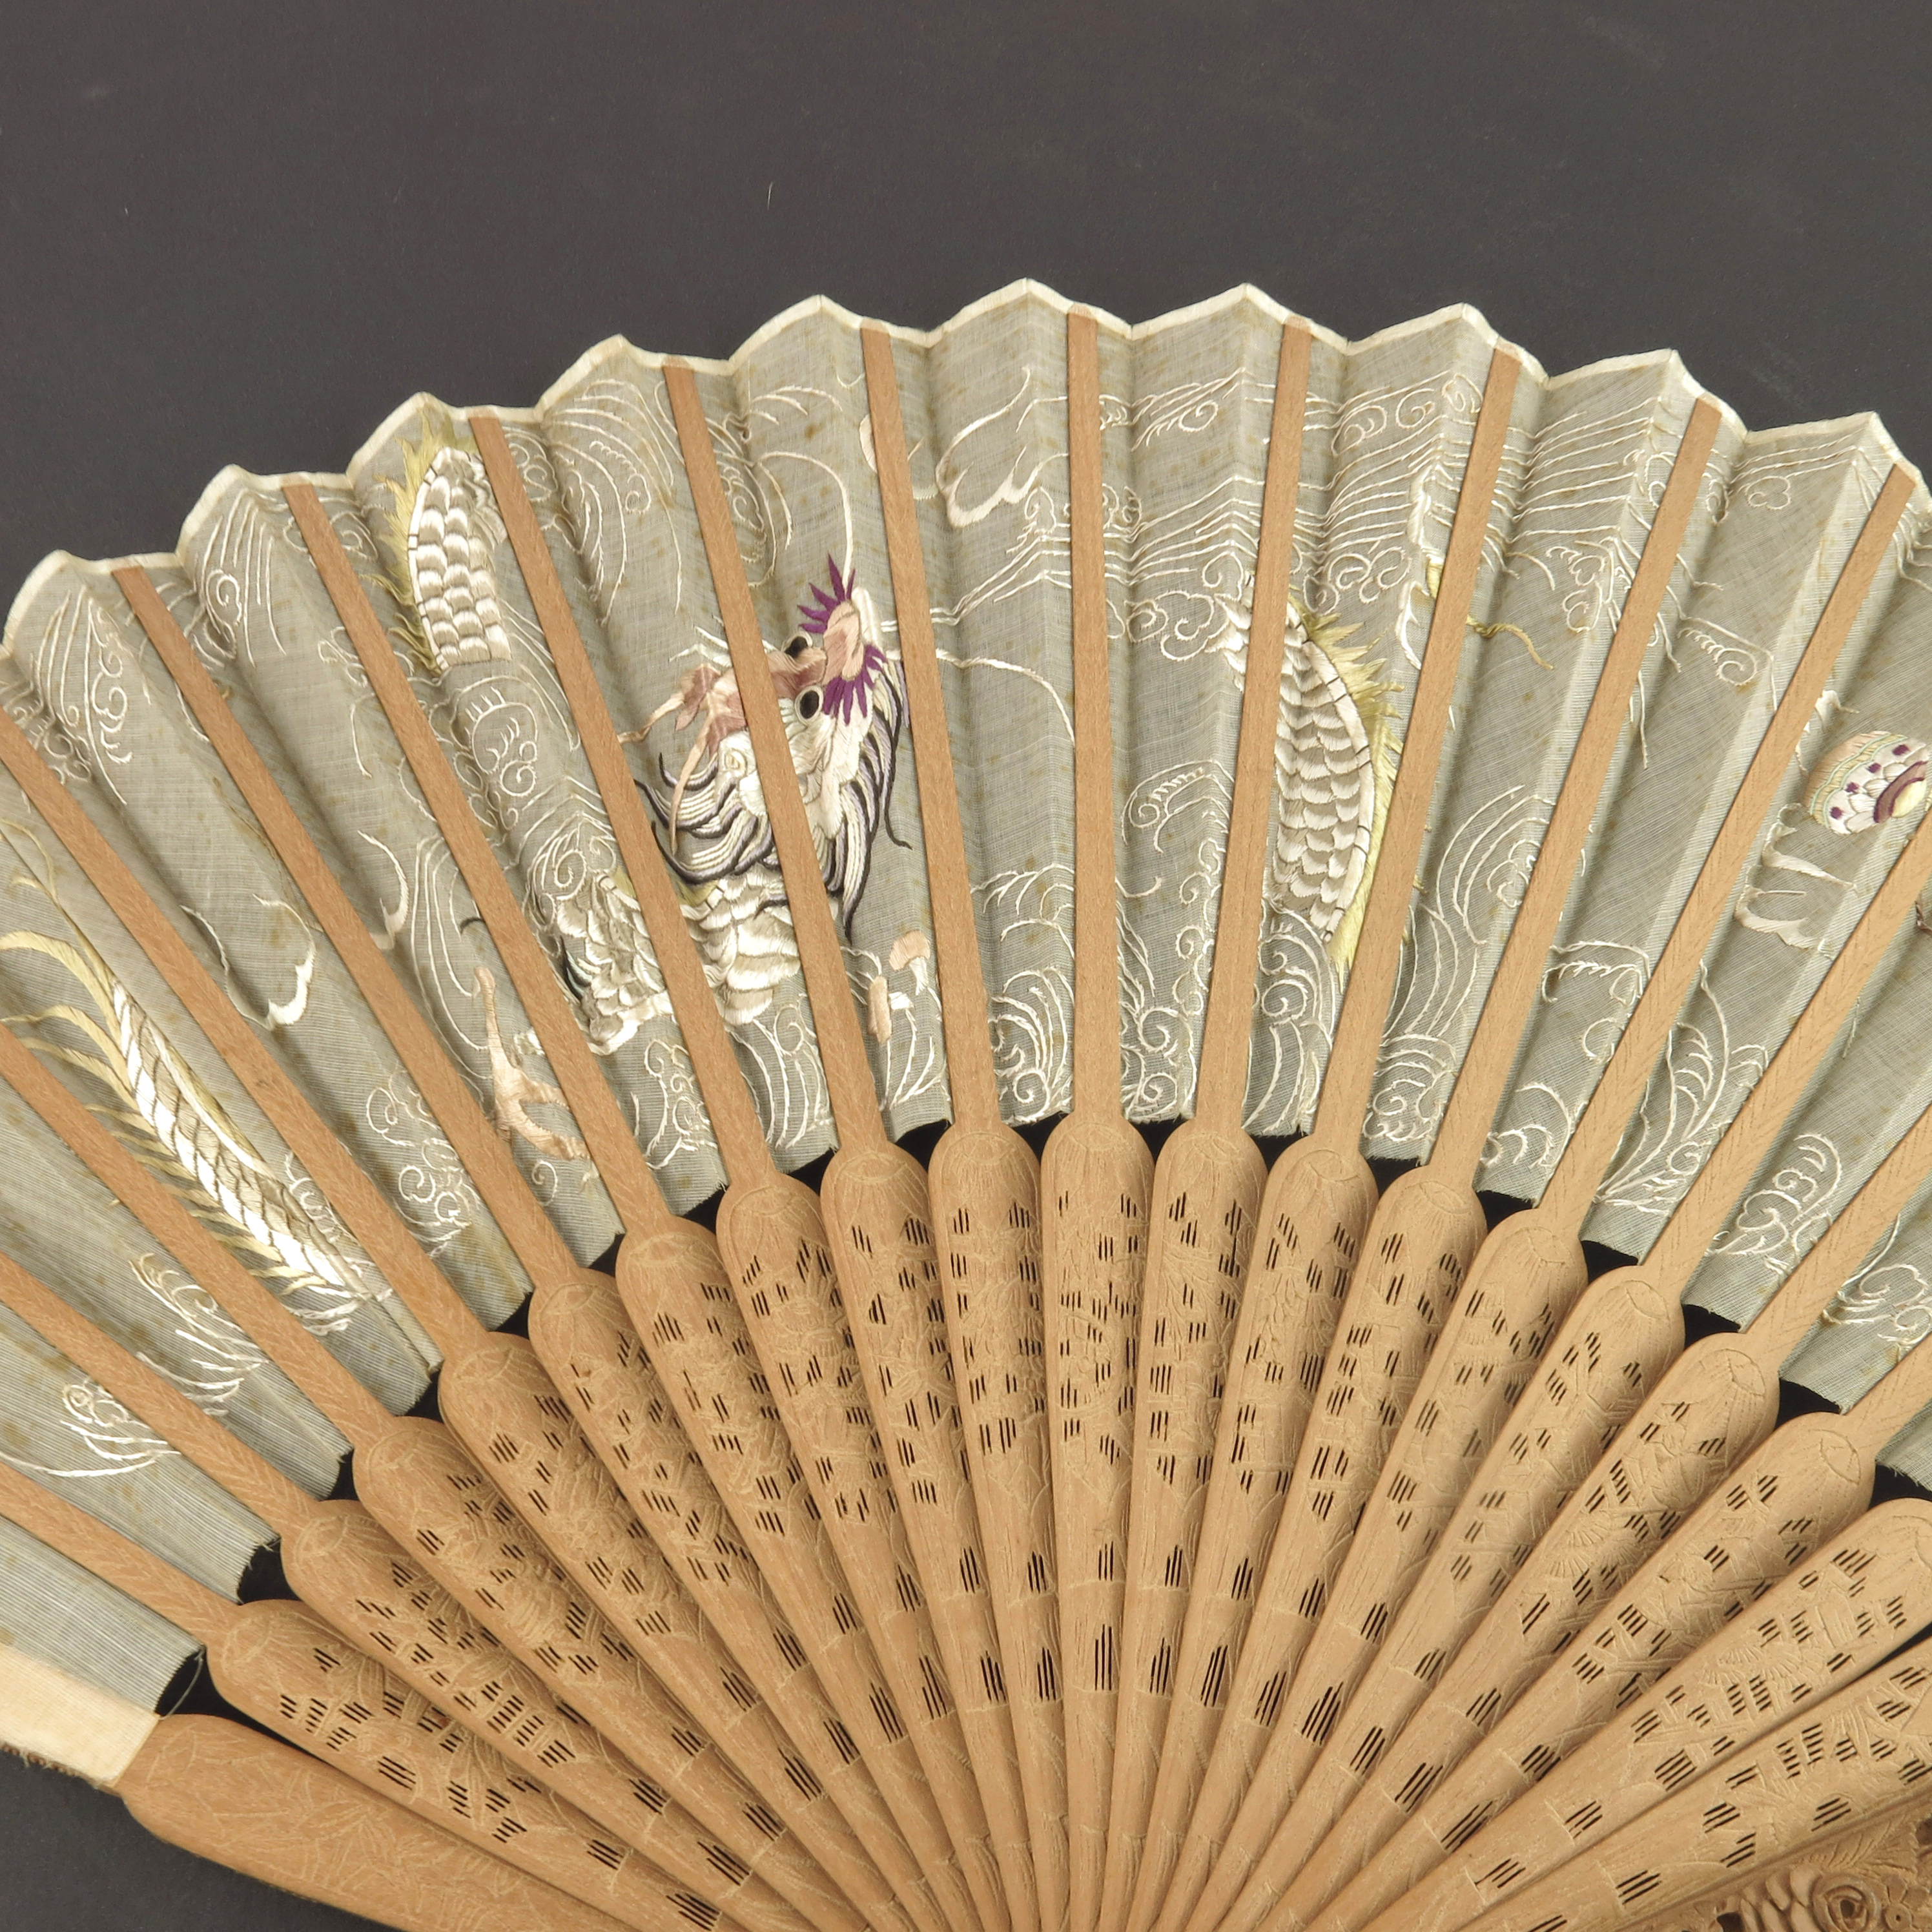 A 19th century Qing Dynasty Chinese fan with carved sandalwood monture, the guards both deeply carve - Image 4 of 4